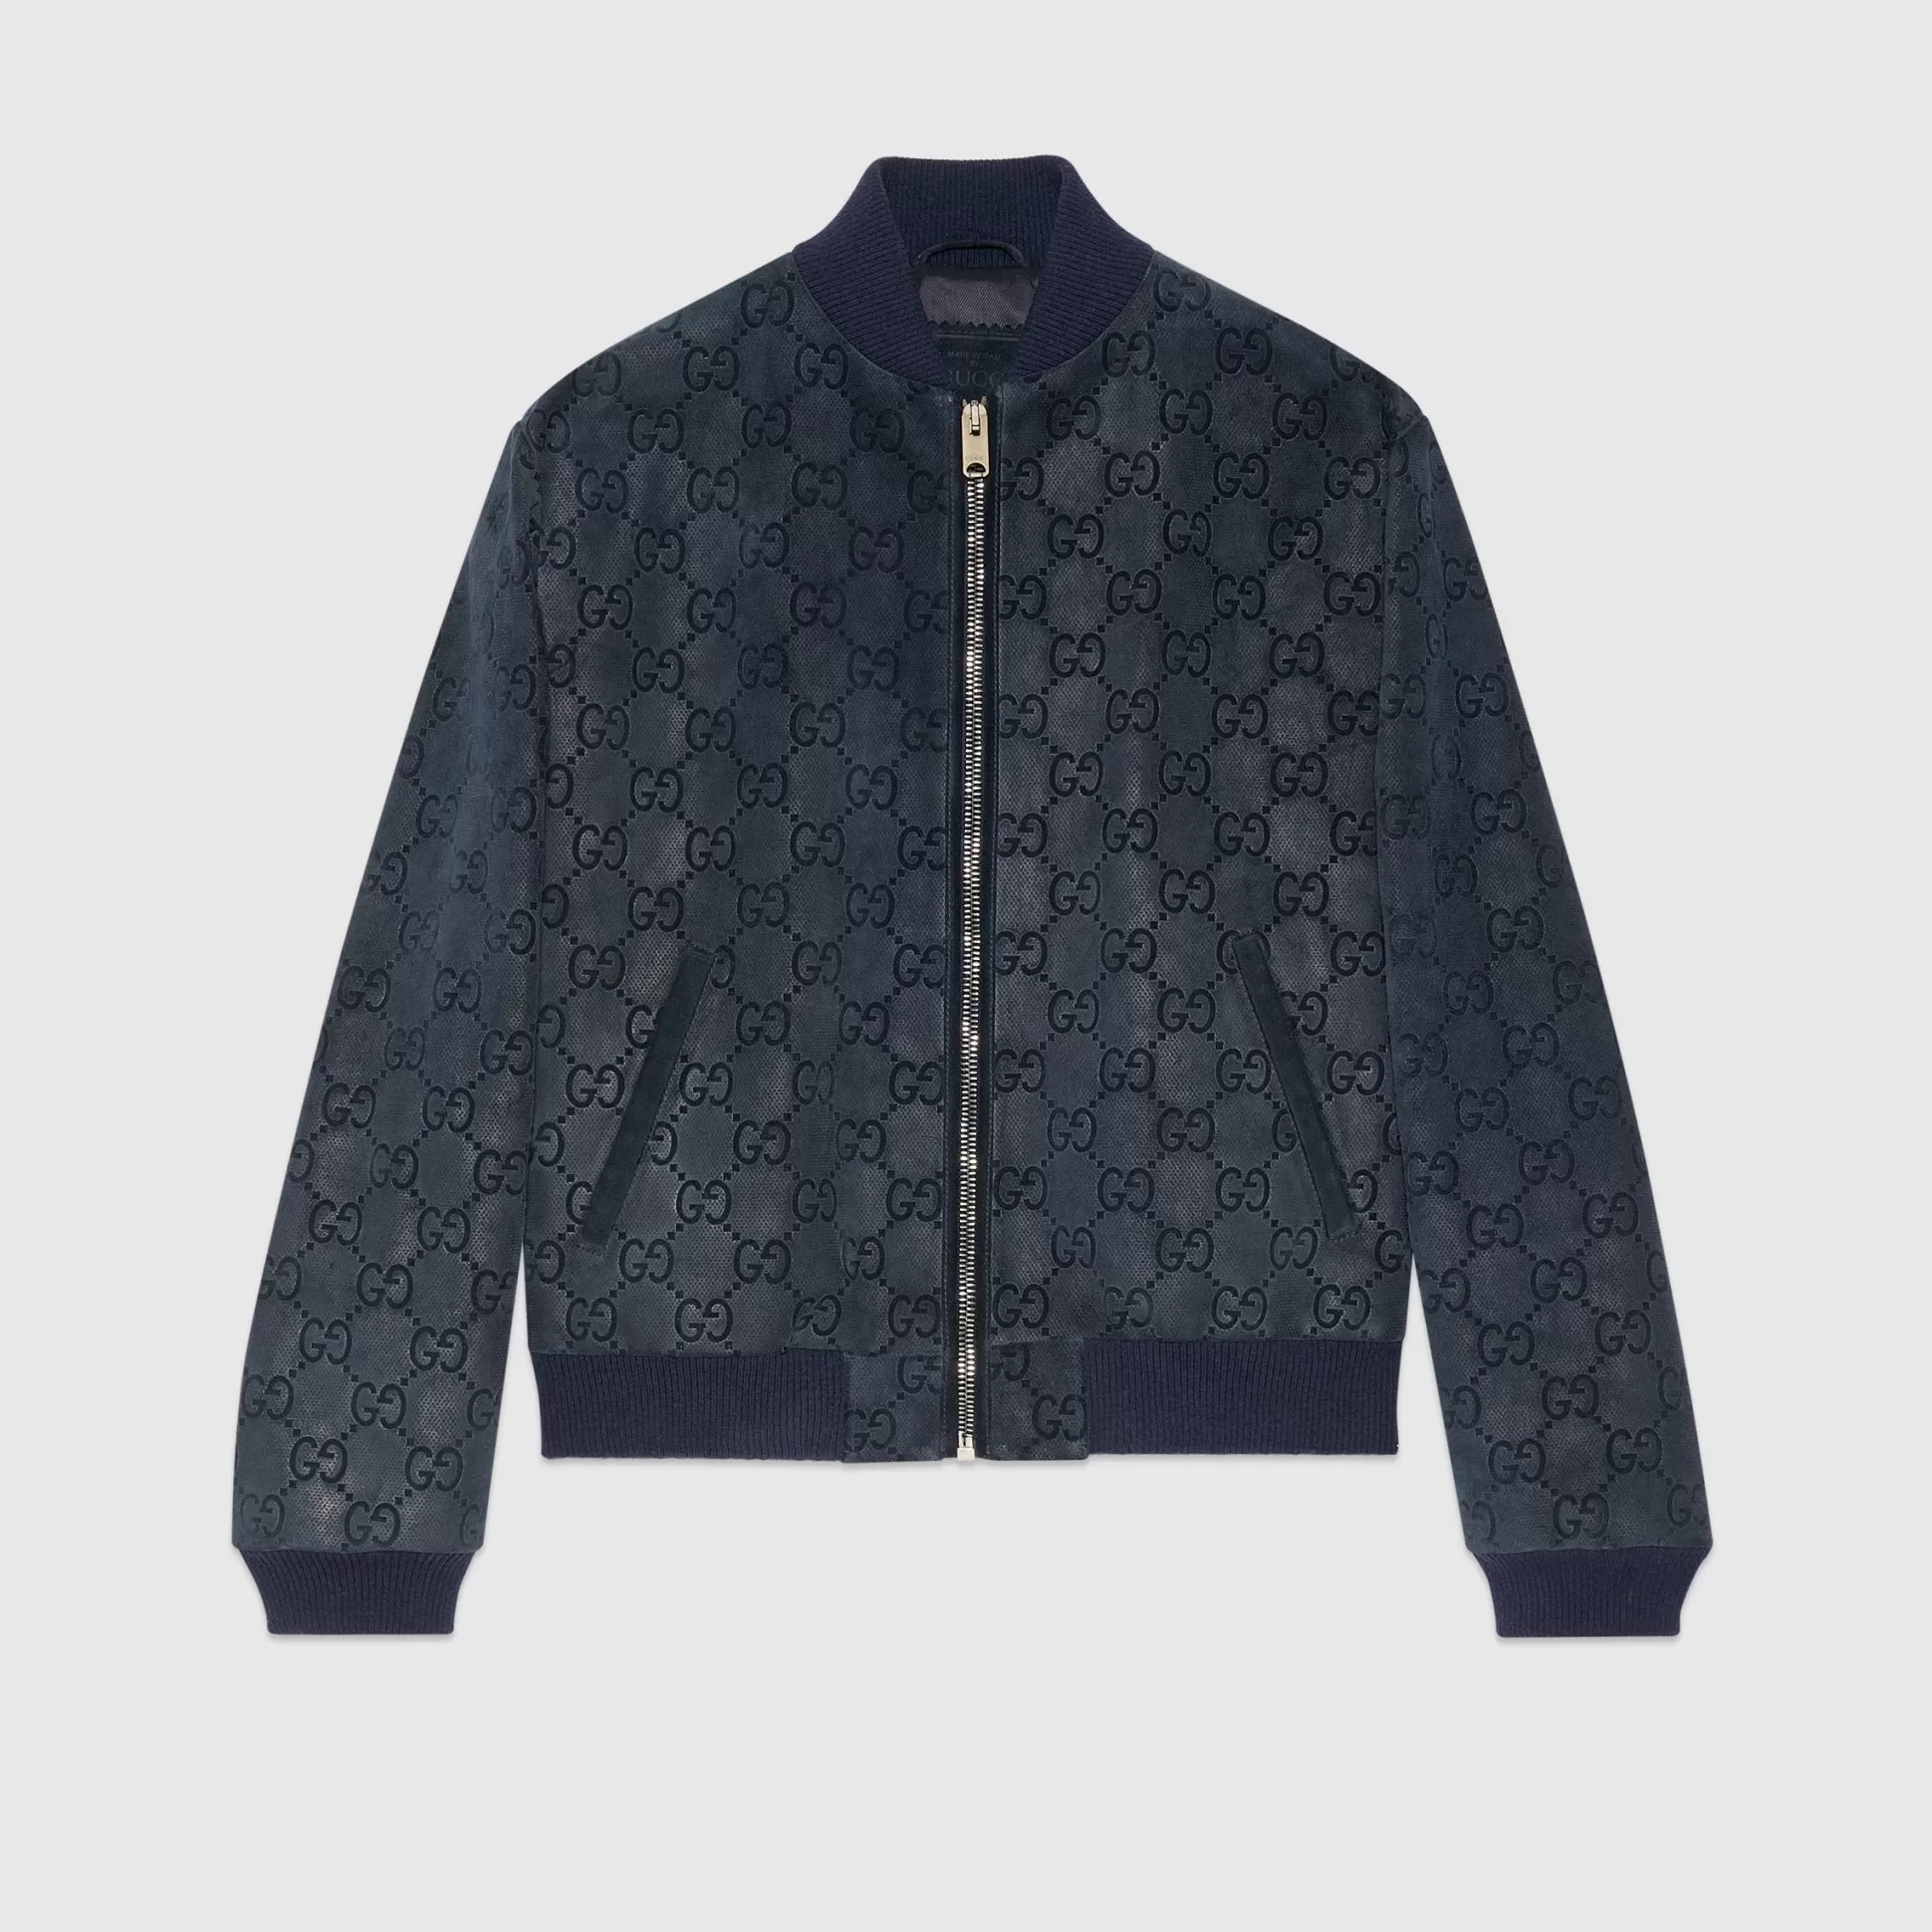 GUCCI Gg Printed Suede Bomber Jacket-Men Leather